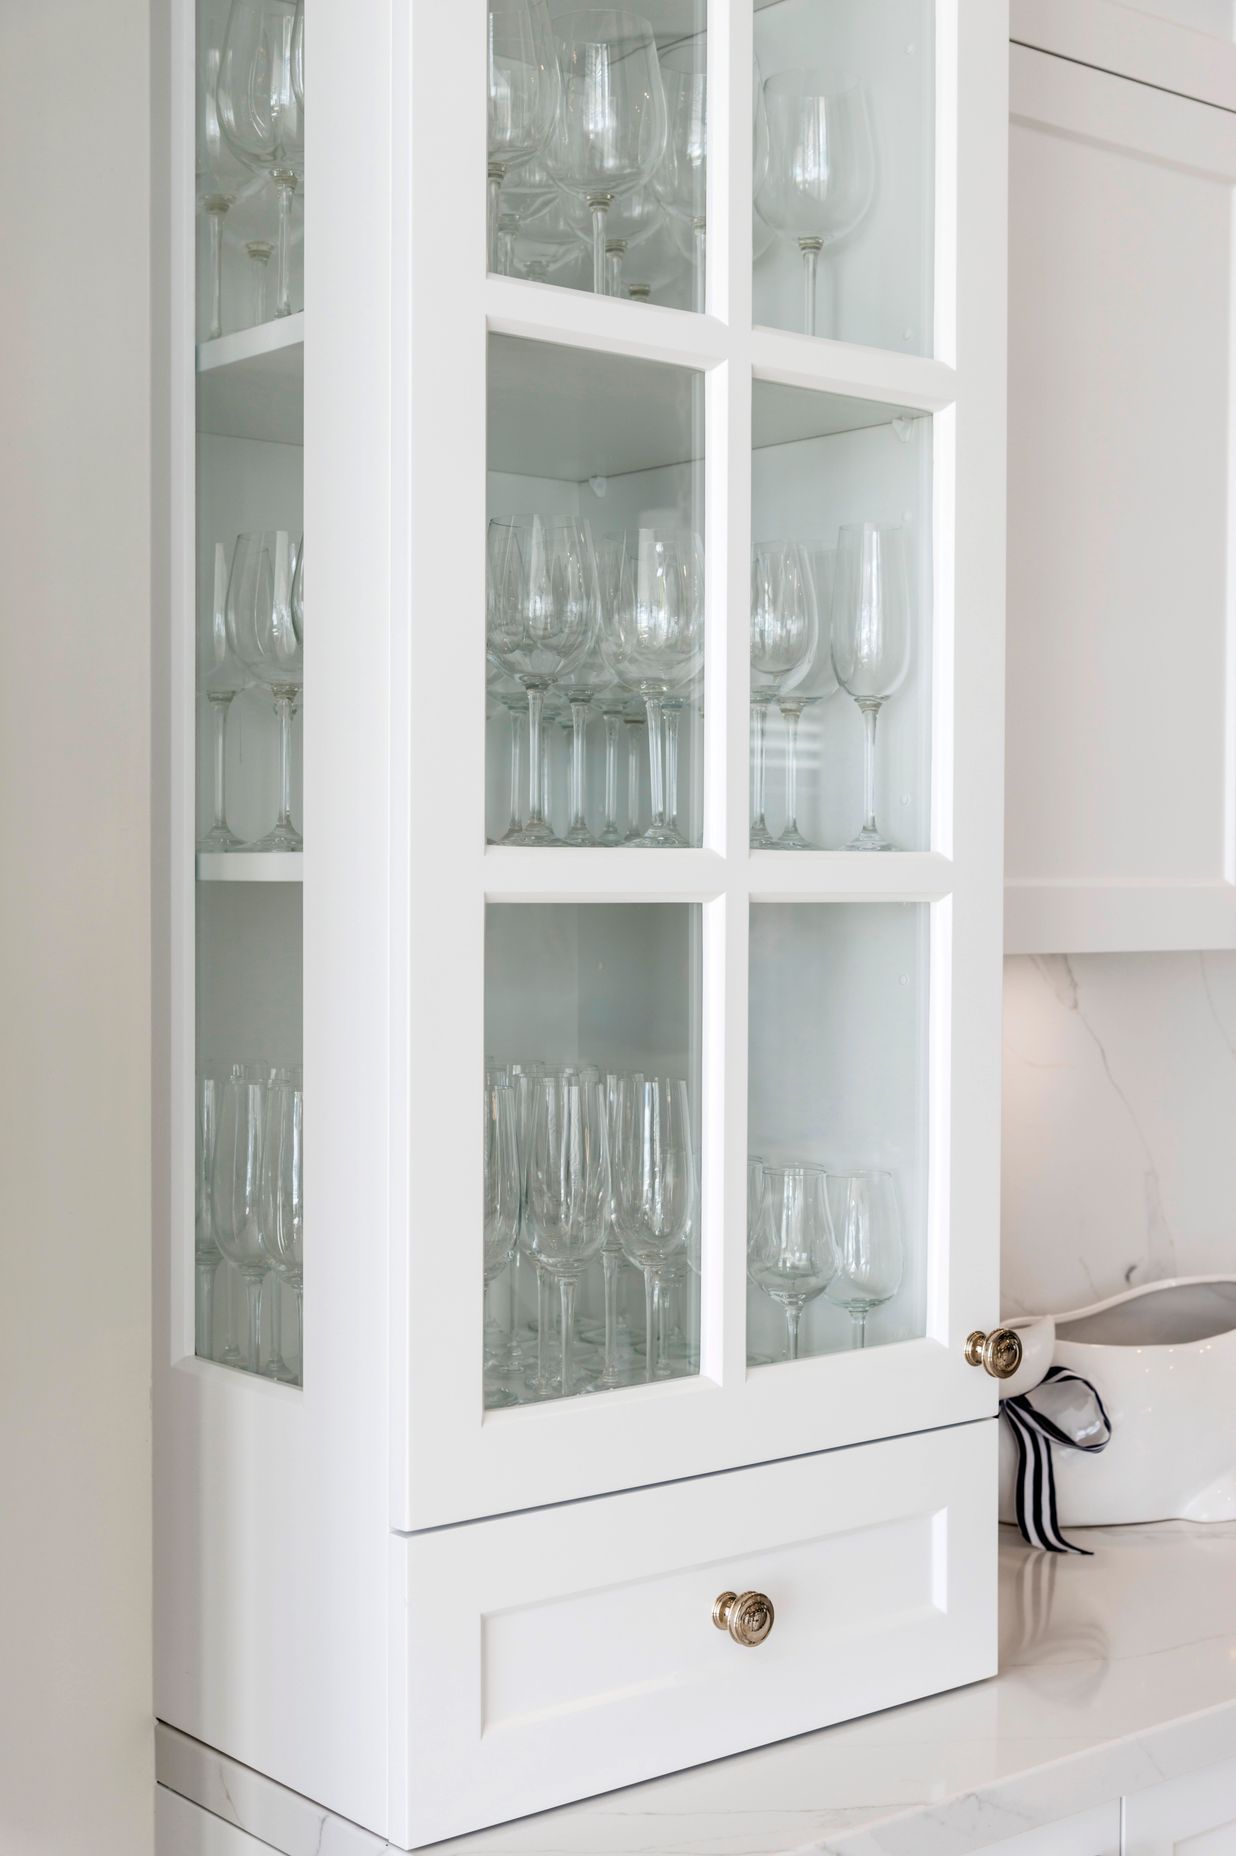 Photography: Germancraft Cabinets